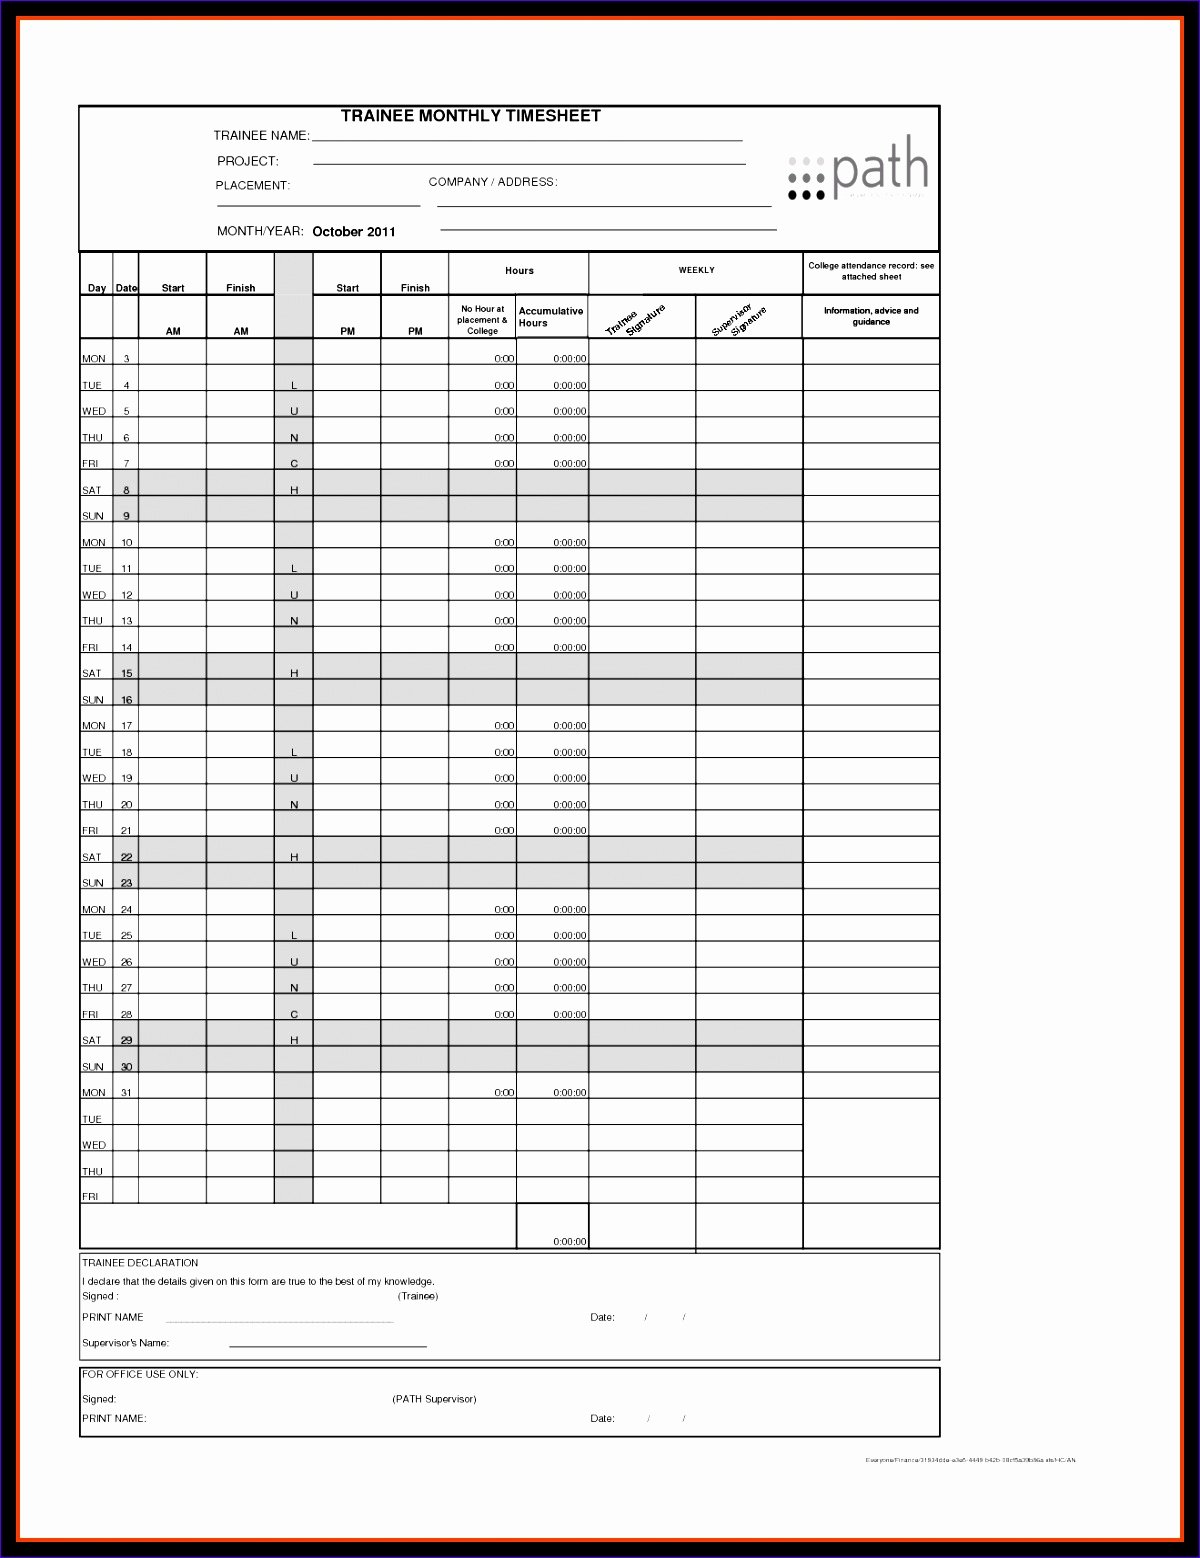 Excel Survey Results Template Lovely 9 Excel Survey Results Template Exceltemplates